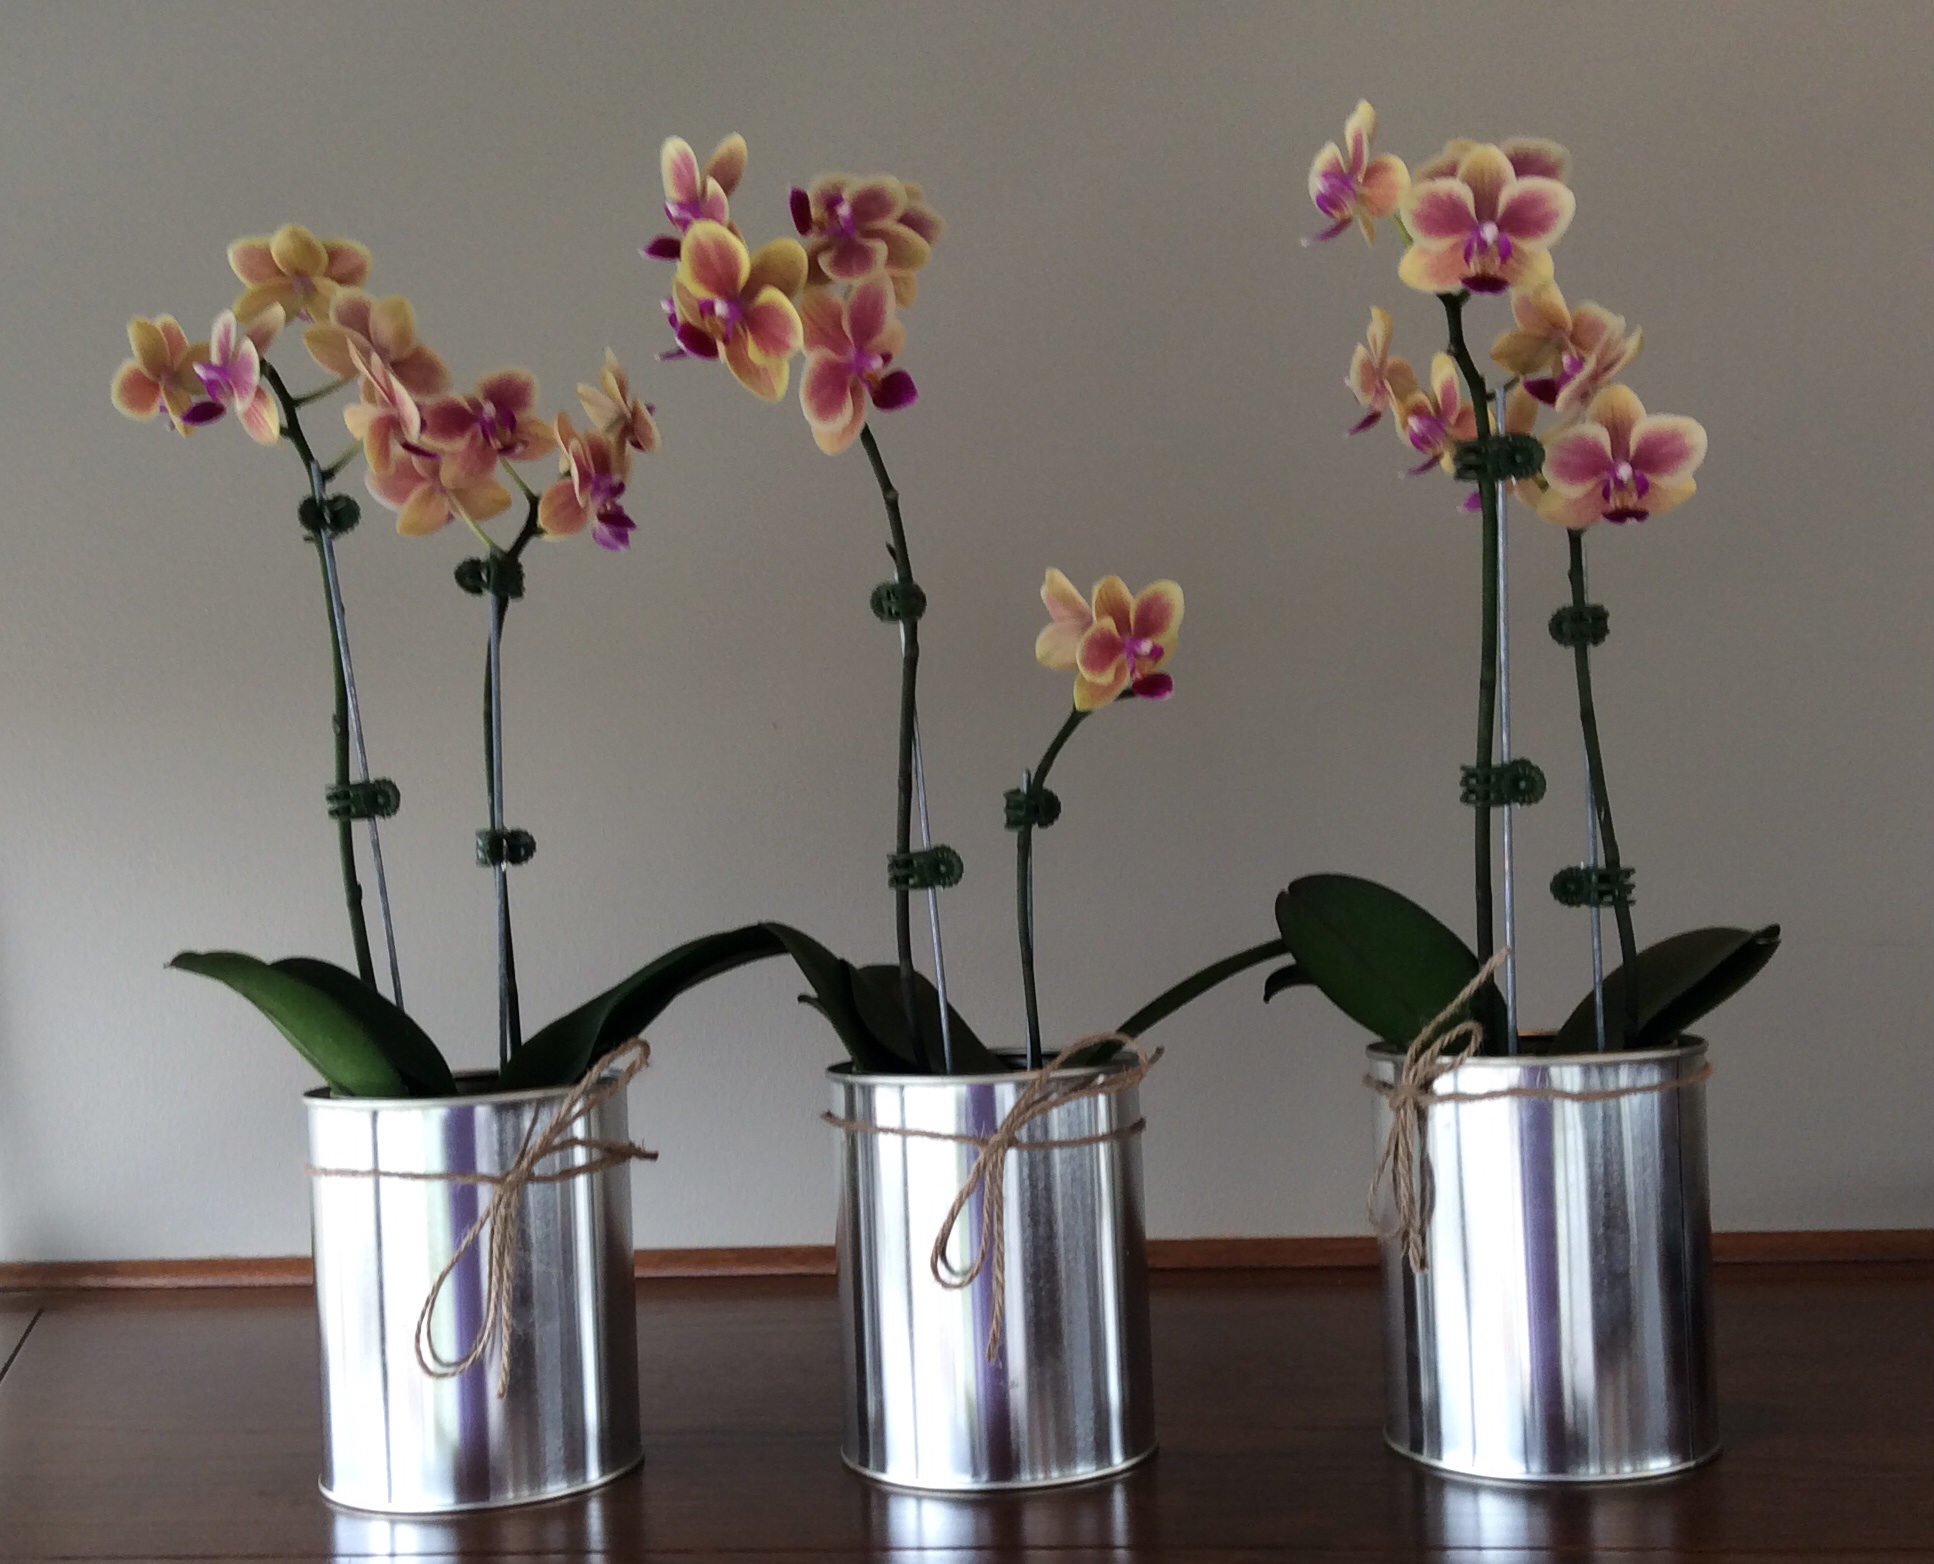 Paint tins are ideal containers for these orchids